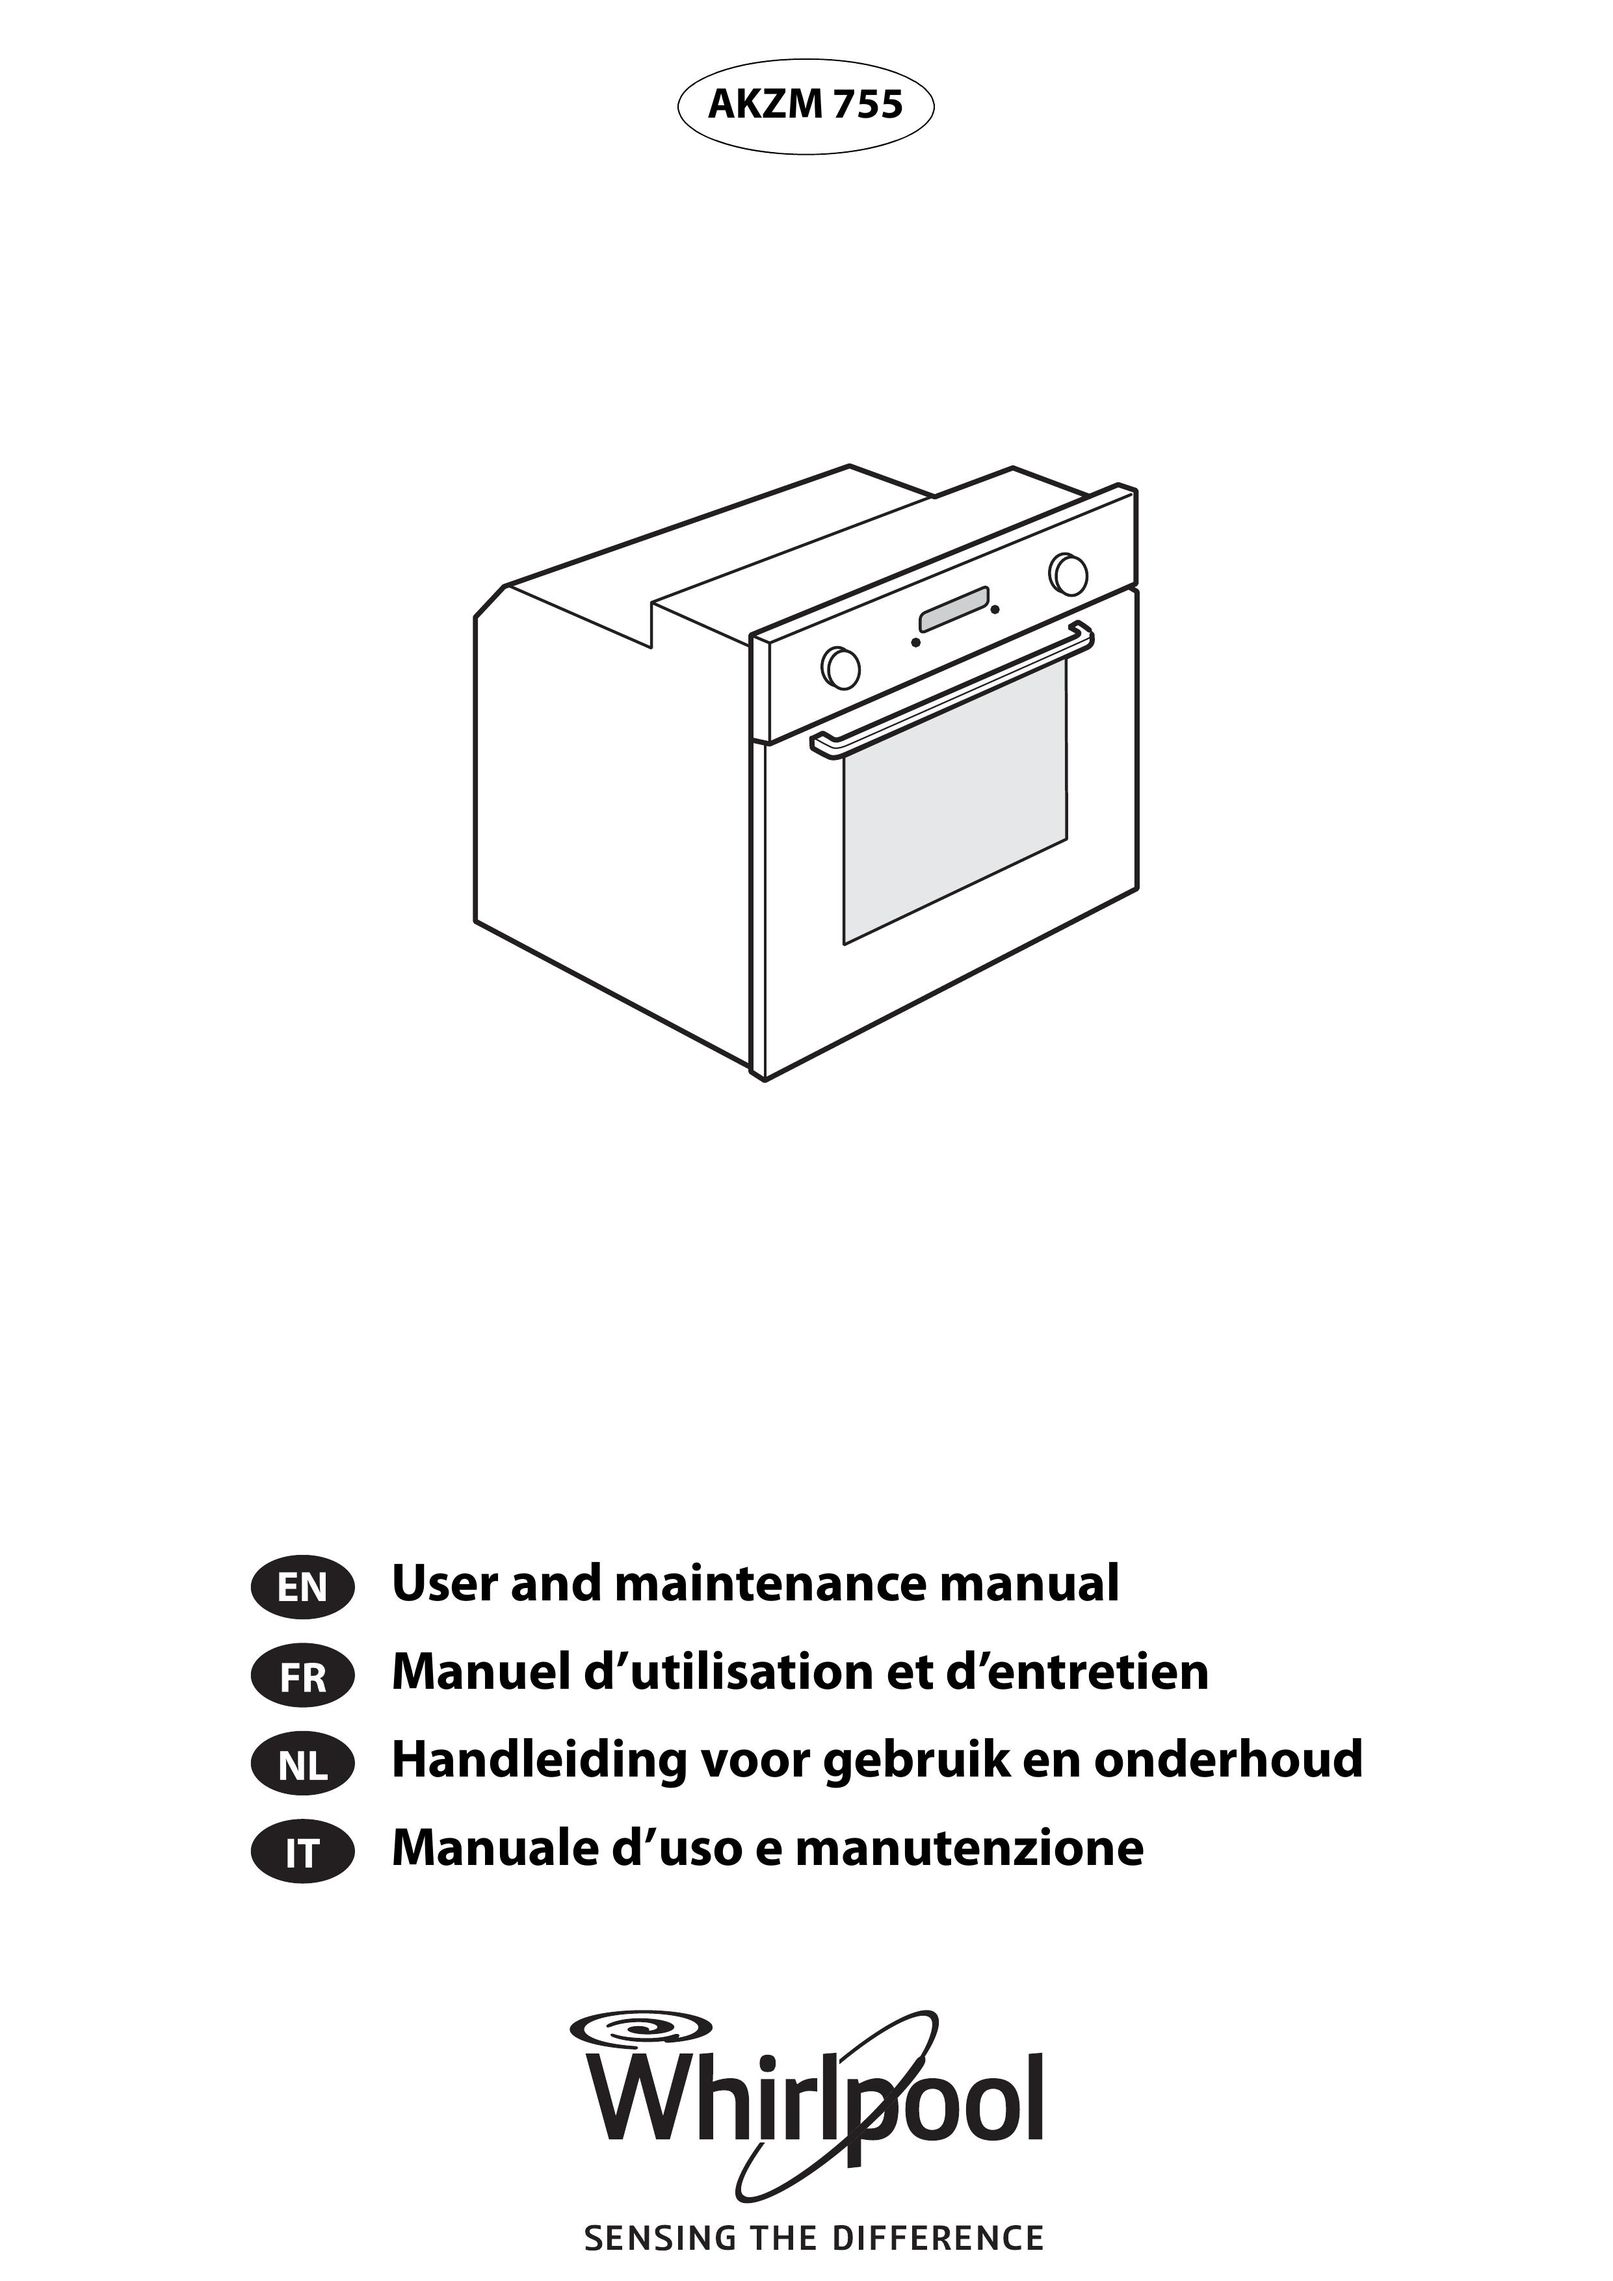 Whirlpool AKZM 755 Oven Accessories User Manual